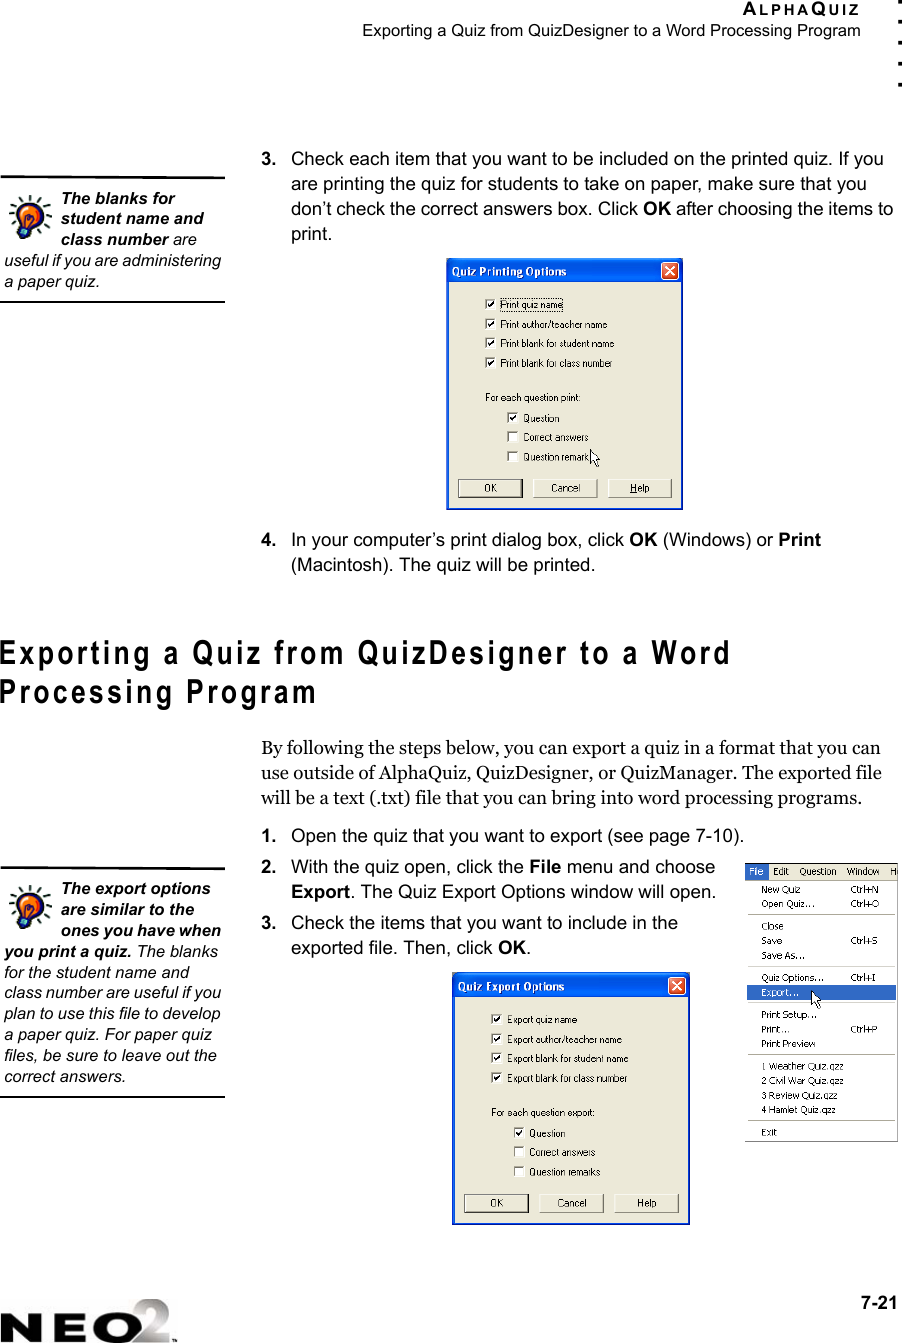 ALPHAQUIZExporting a Quiz from QuizDesigner to a Word Processing Program7-21. . . . .3. Check each item that you want to be included on the printed quiz. If you are printing the quiz for students to take on paper, make sure that you don’t check the correct answers box. Click OK after choosing the items to print.4. In your computer’s print dialog box, click OK (Windows) or Print (Macintosh). The quiz will be printed.Exporting a Quiz from QuizDesigner to a Word Processing ProgramBy following the steps below, you can export a quiz in a format that you can use outside of AlphaQuiz, QuizDesigner, or QuizManager. The exported file will be a text (.txt) file that you can bring into word processing programs.1. Open the quiz that you want to export (see page 7-10).2. With the quiz open, click the File menu and choose Export. The Quiz Export Options window will open.3. Check the items that you want to include in the exported file. Then, click OK.The blanks for student name and class number are useful if you are administering a paper quiz.The export options are similar to the ones you have when you print a quiz. The blanks for the student name and class number are useful if you plan to use this file to develop a paper quiz. For paper quiz files, be sure to leave out the correct answers.